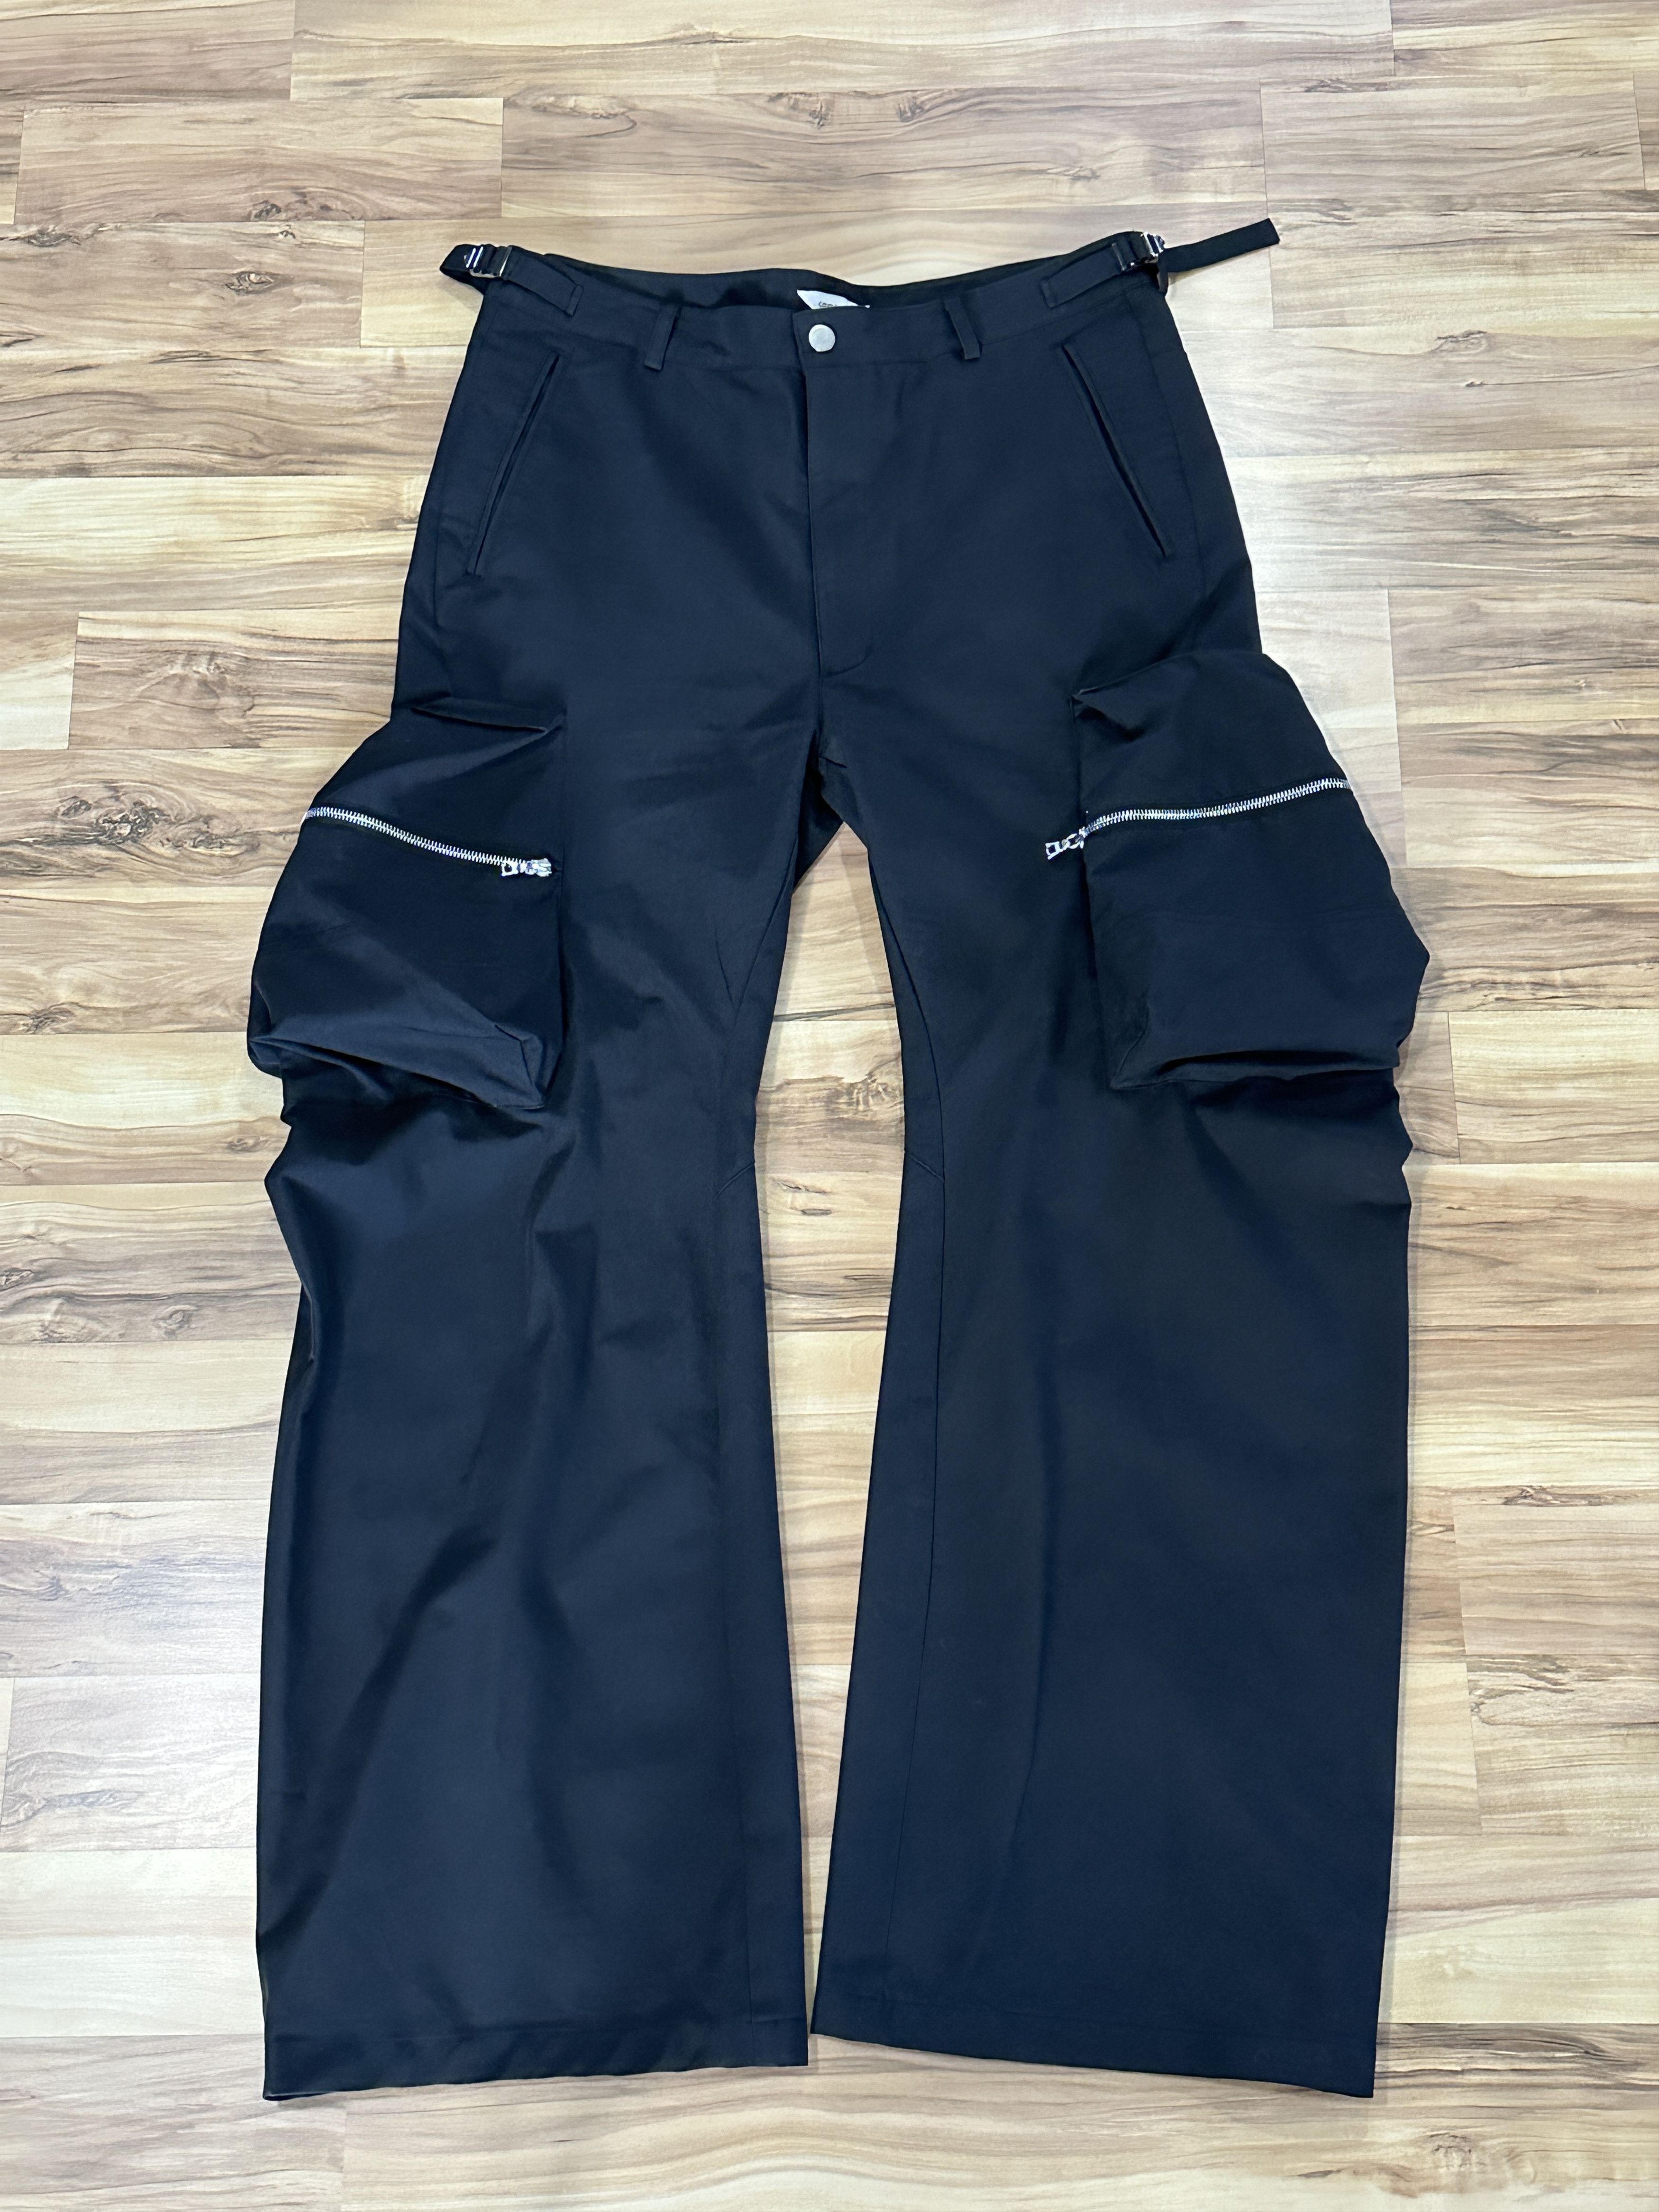 Cmmawear articulated cargo pants - パンツ